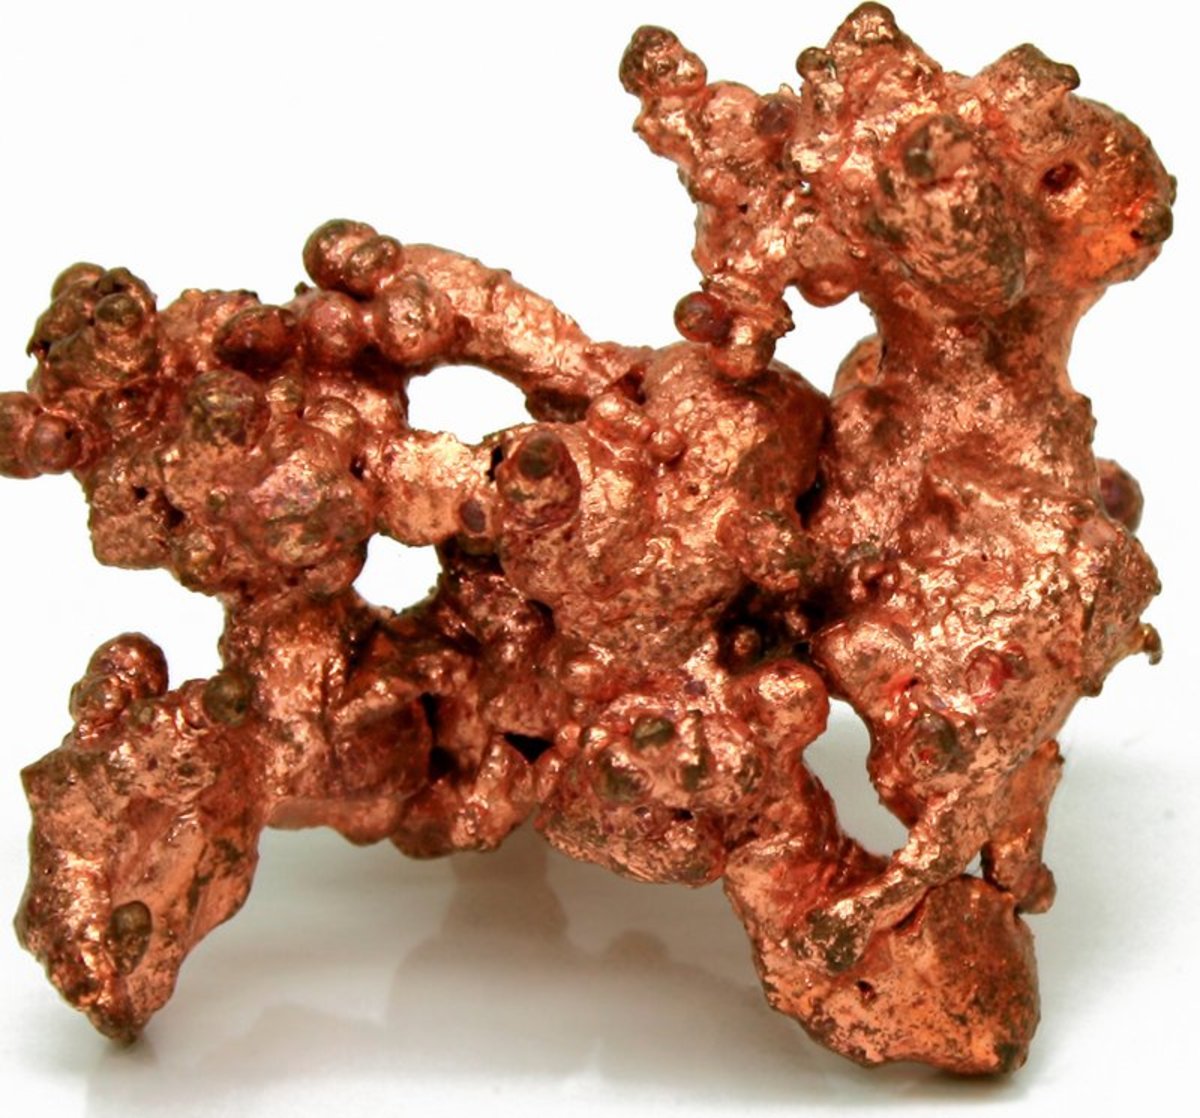 Copper is a mineral native to Pennsylvania. Here is a specimen of native copper.